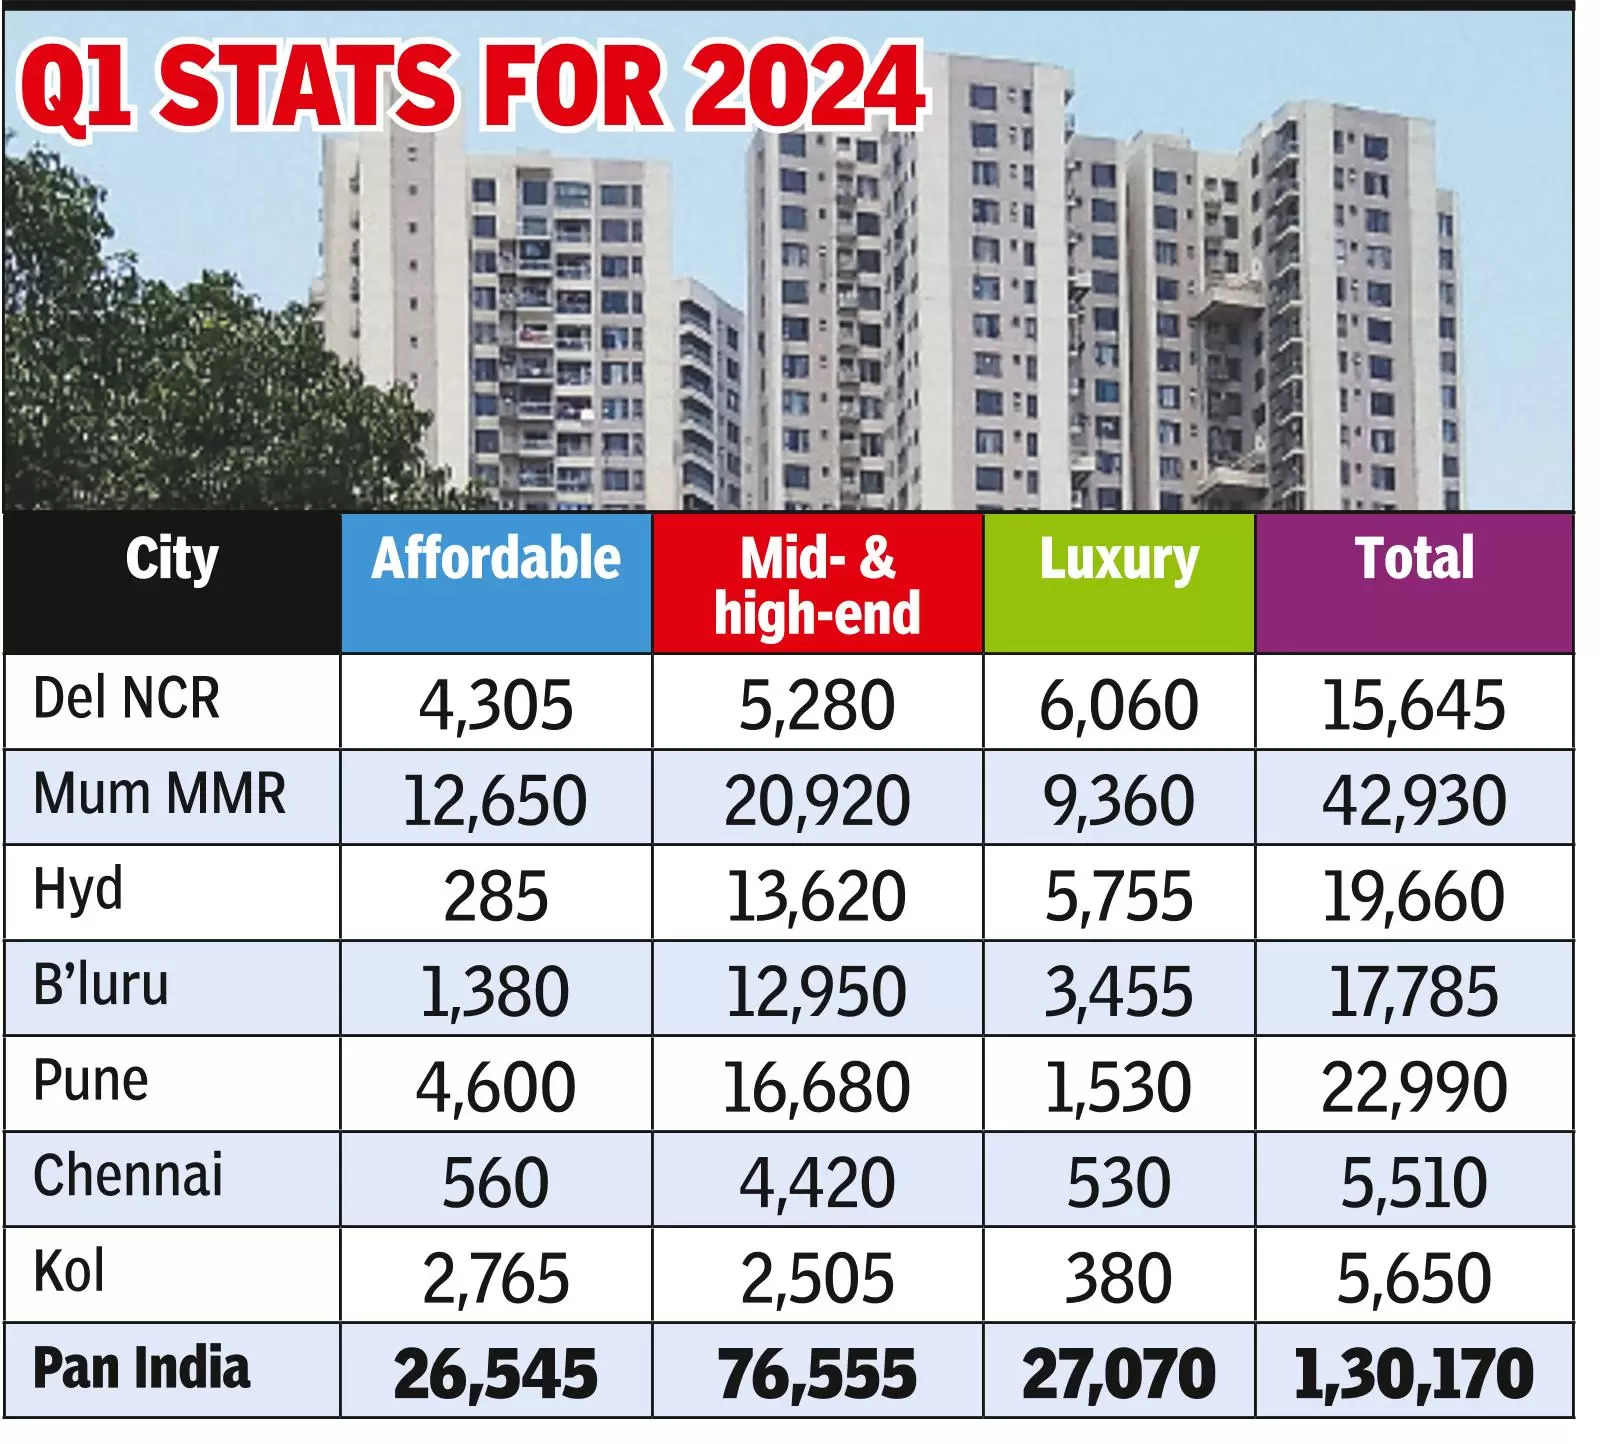 Sale of luxury homes in Kolkata doubles over pre-pandemic figures